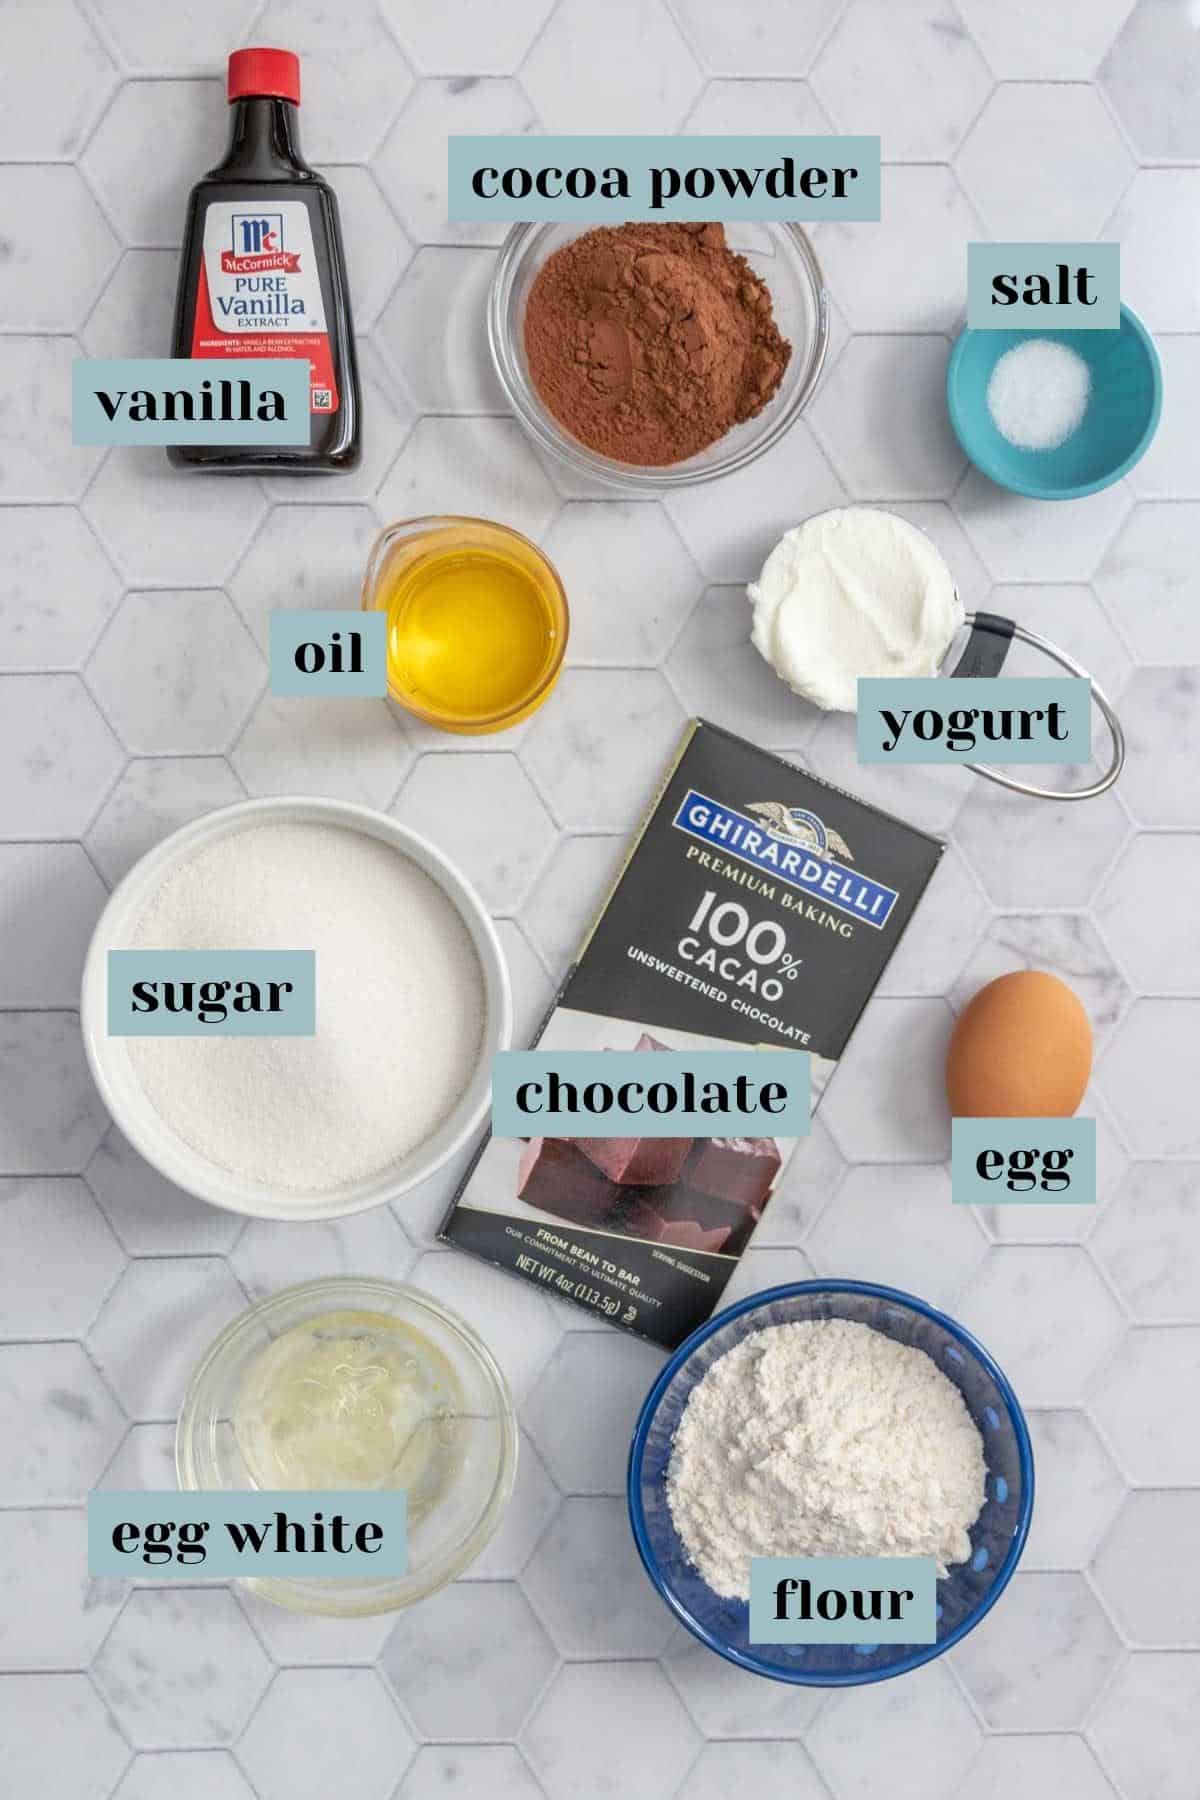 Ingredients for fudgy brownies on a tile surface with labels.